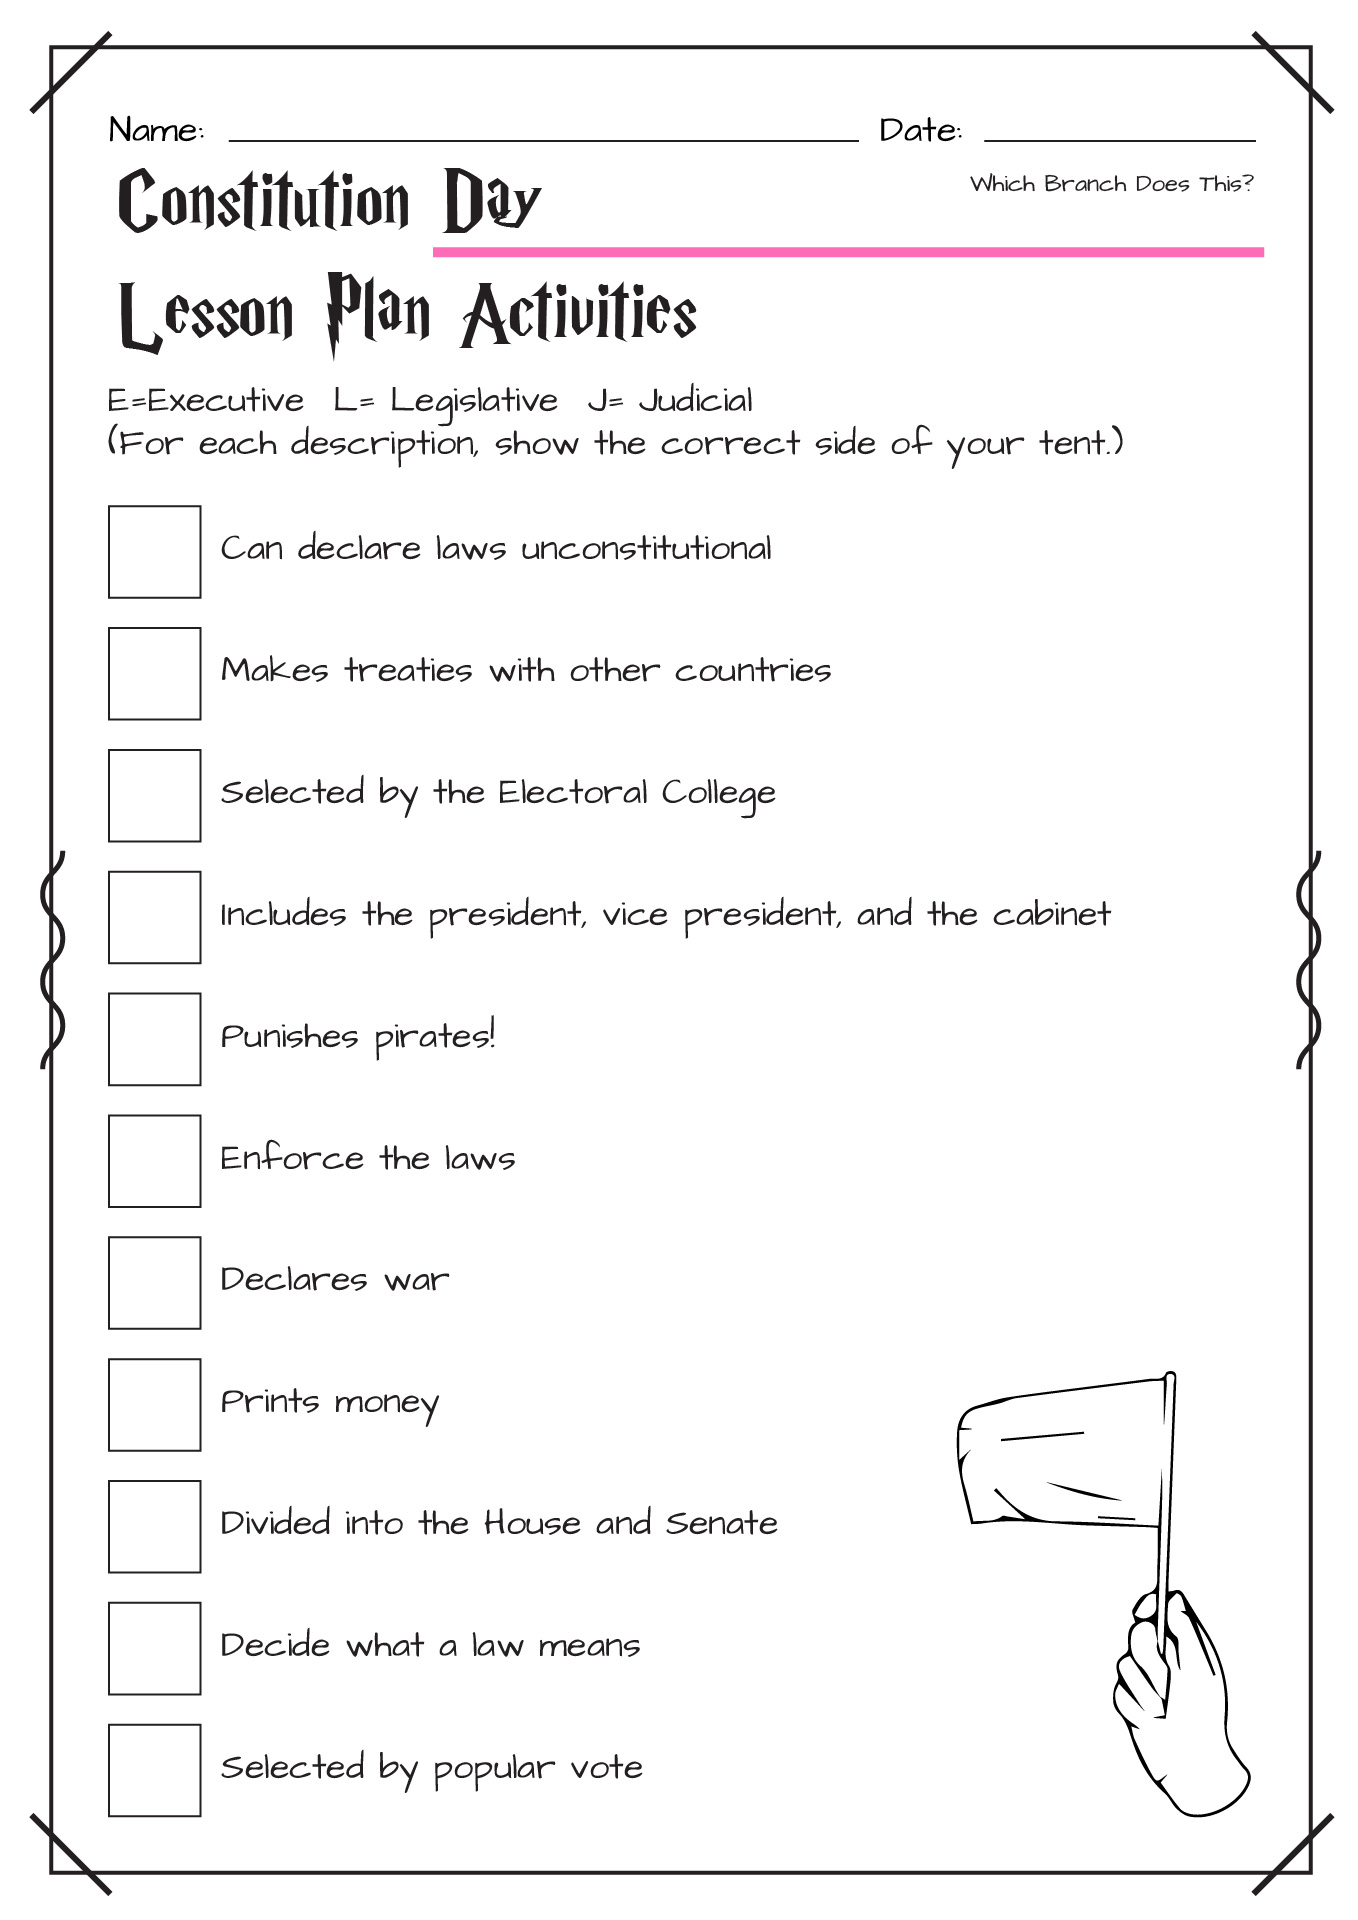 Constitution Day Lesson Plan Activities Image